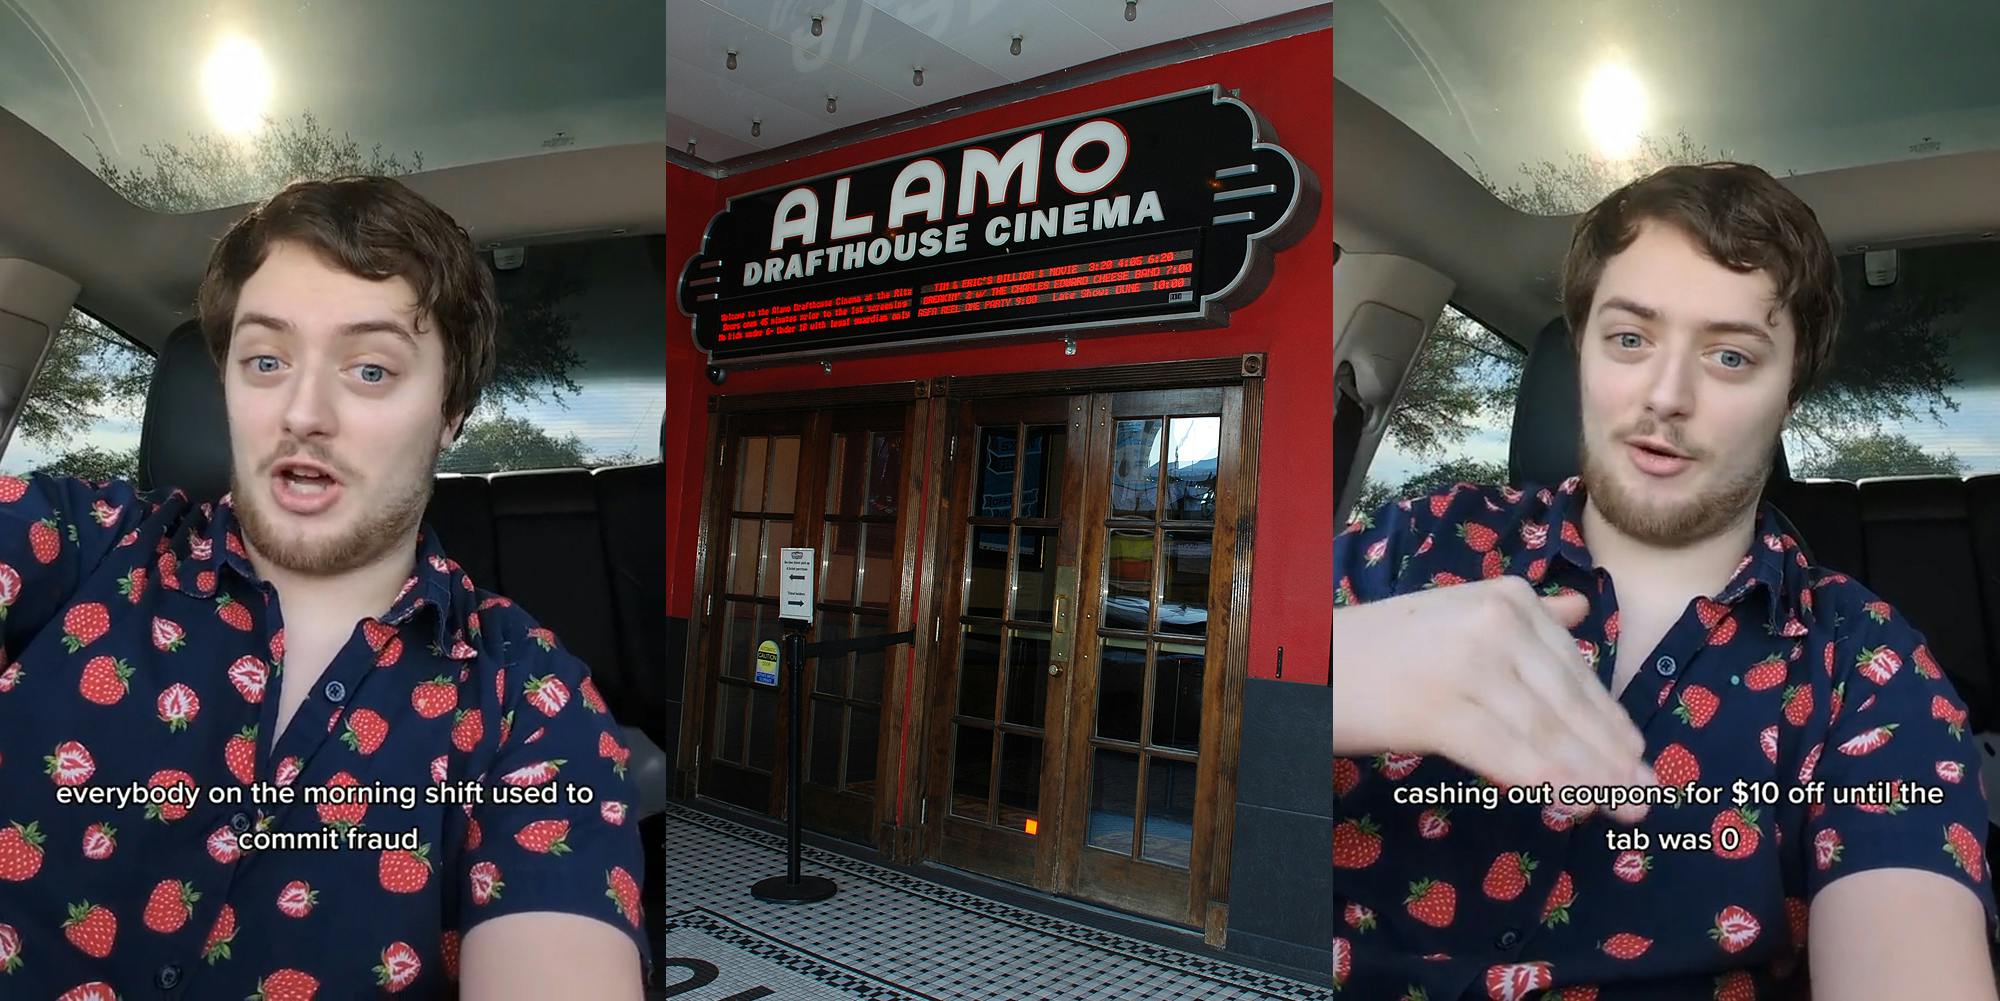 former Alamo Drafthouse employee speaking in car with caption "everybody on the morning shift used to commit fraud" (l) Alamo Drafthouse Cinema sign above doors (c) former Alamo Drafthouse employee speaking in car with caption "cashing out coupons for $10 off until the tab was 0" (r)